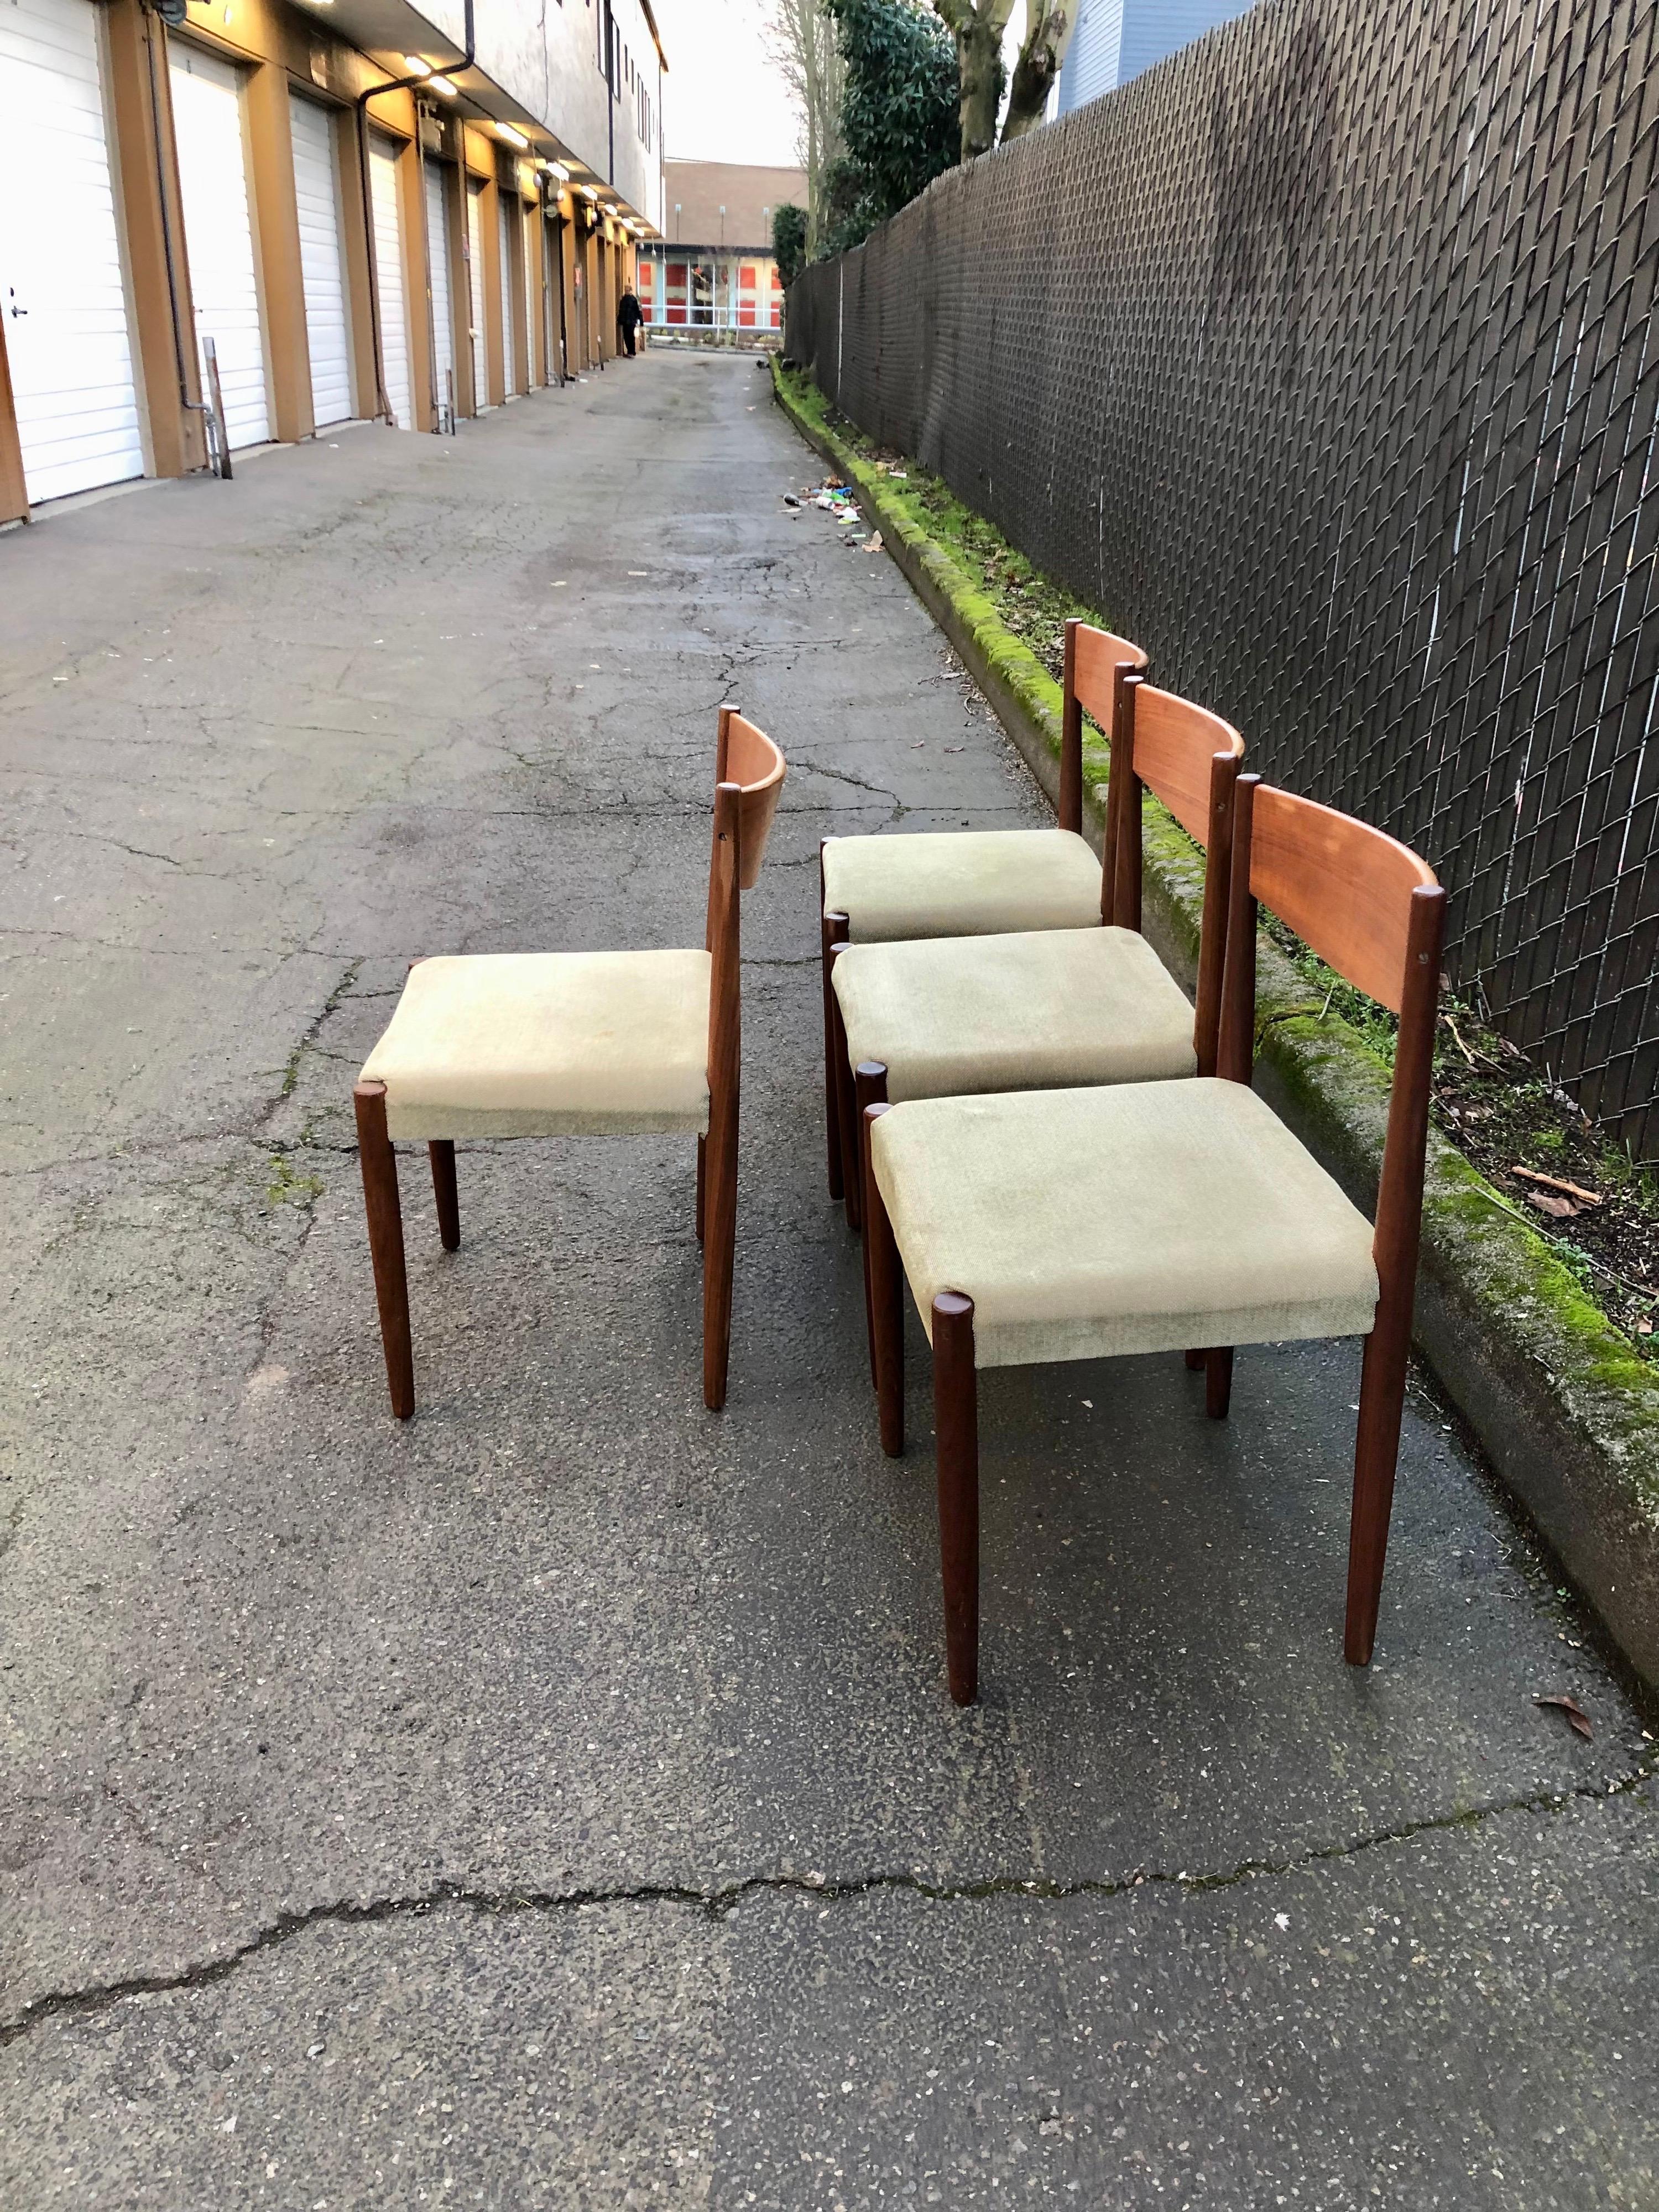 Offered is a set of 4 vintage Mid-Century Modern 1960s danish teak dining chairs. Designed by Poul Volther for Frem Rojle. The minimal design is so striking and gorgeous. Warm teak wood grain, simple lines, and curved backrest.